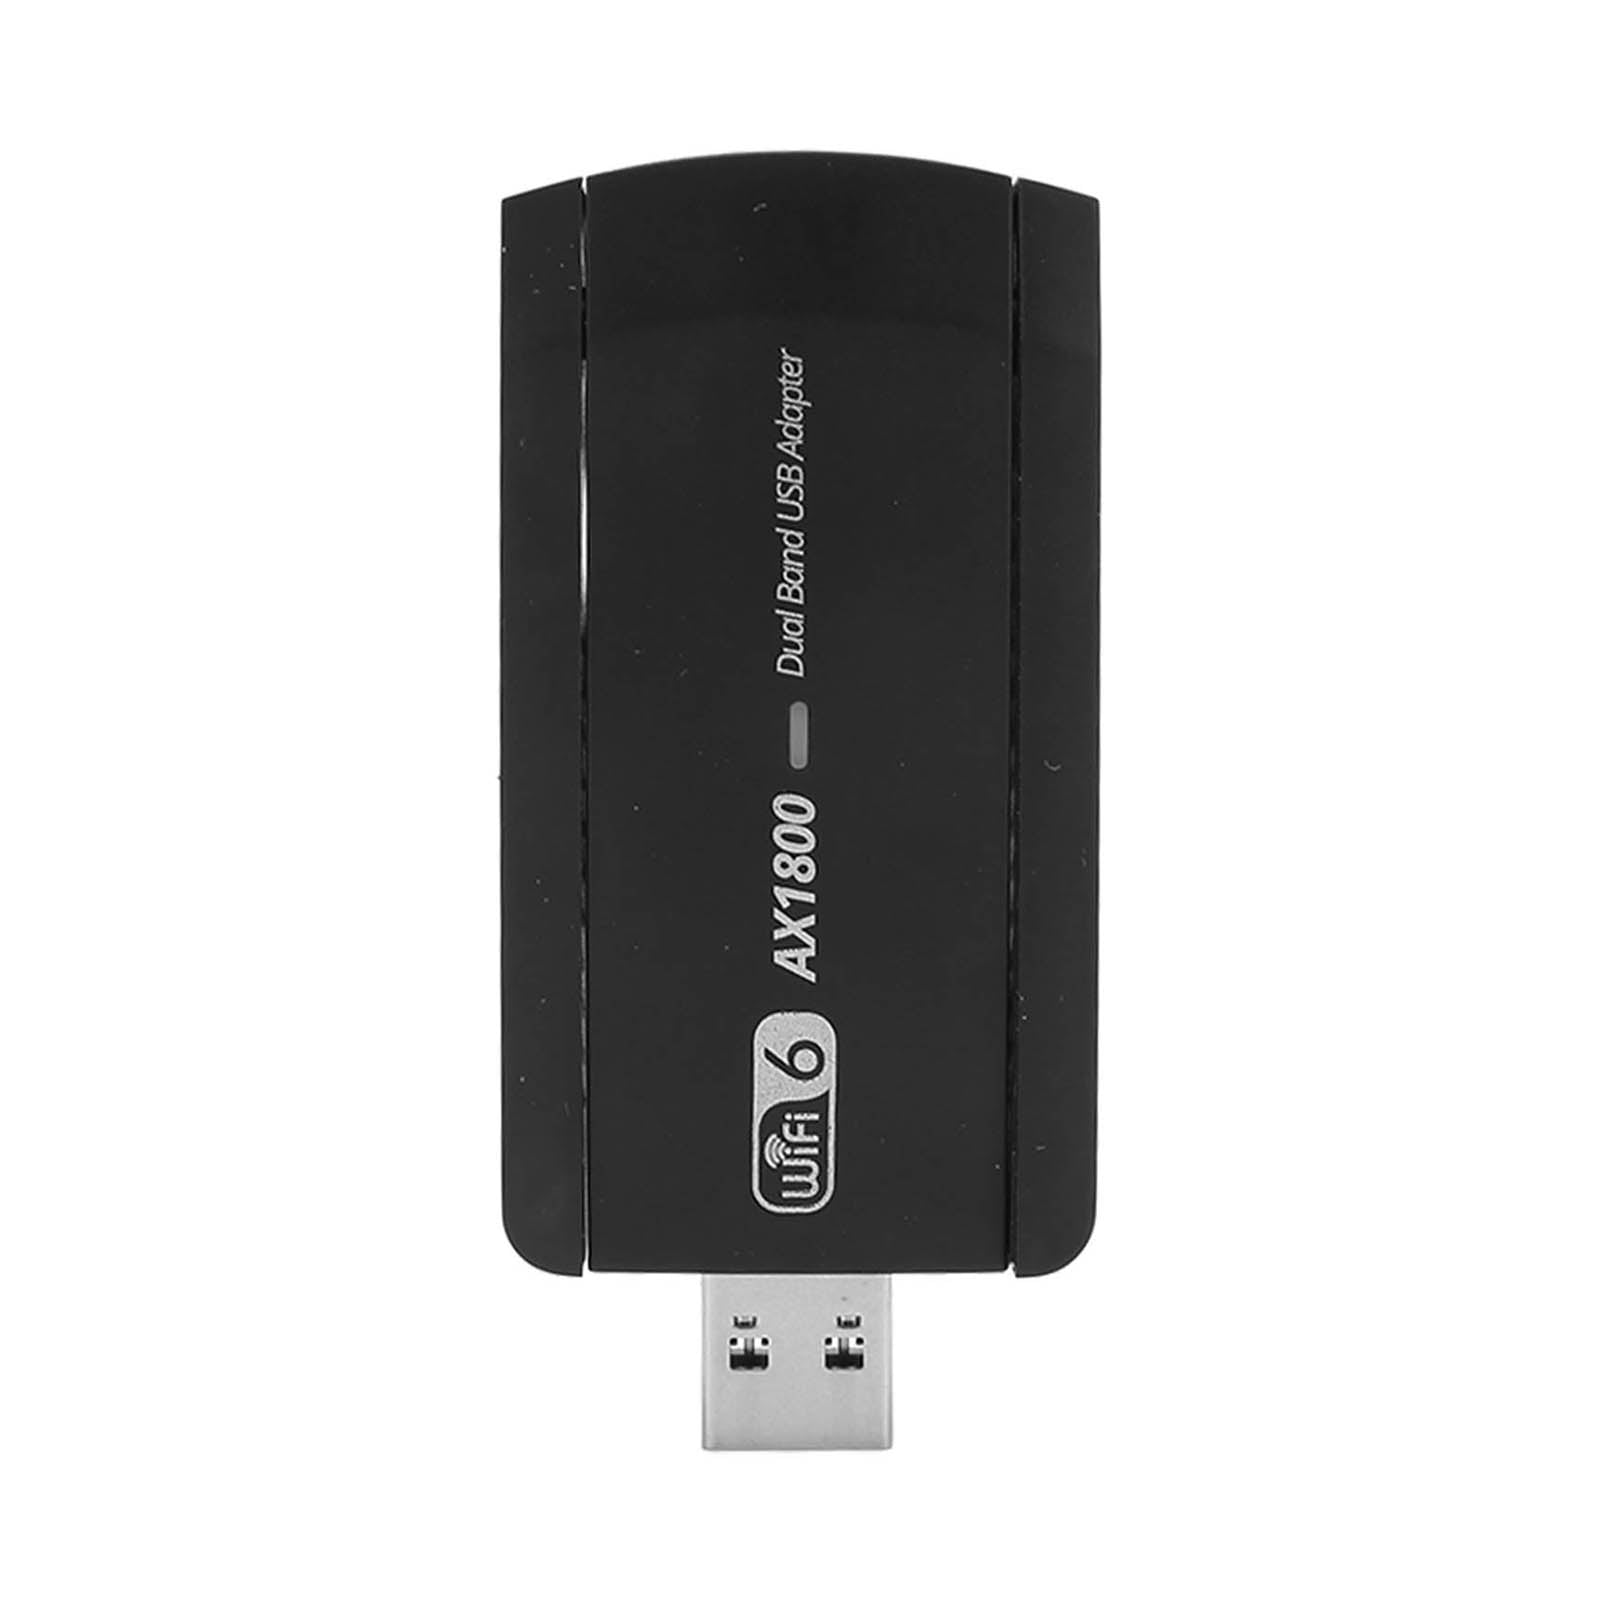 Aeun Adaptateur WiFi 6, Plug and Play WiFi 6 USB3.0 Dongle WiFi  Transmission Stable Double Bande pour PC